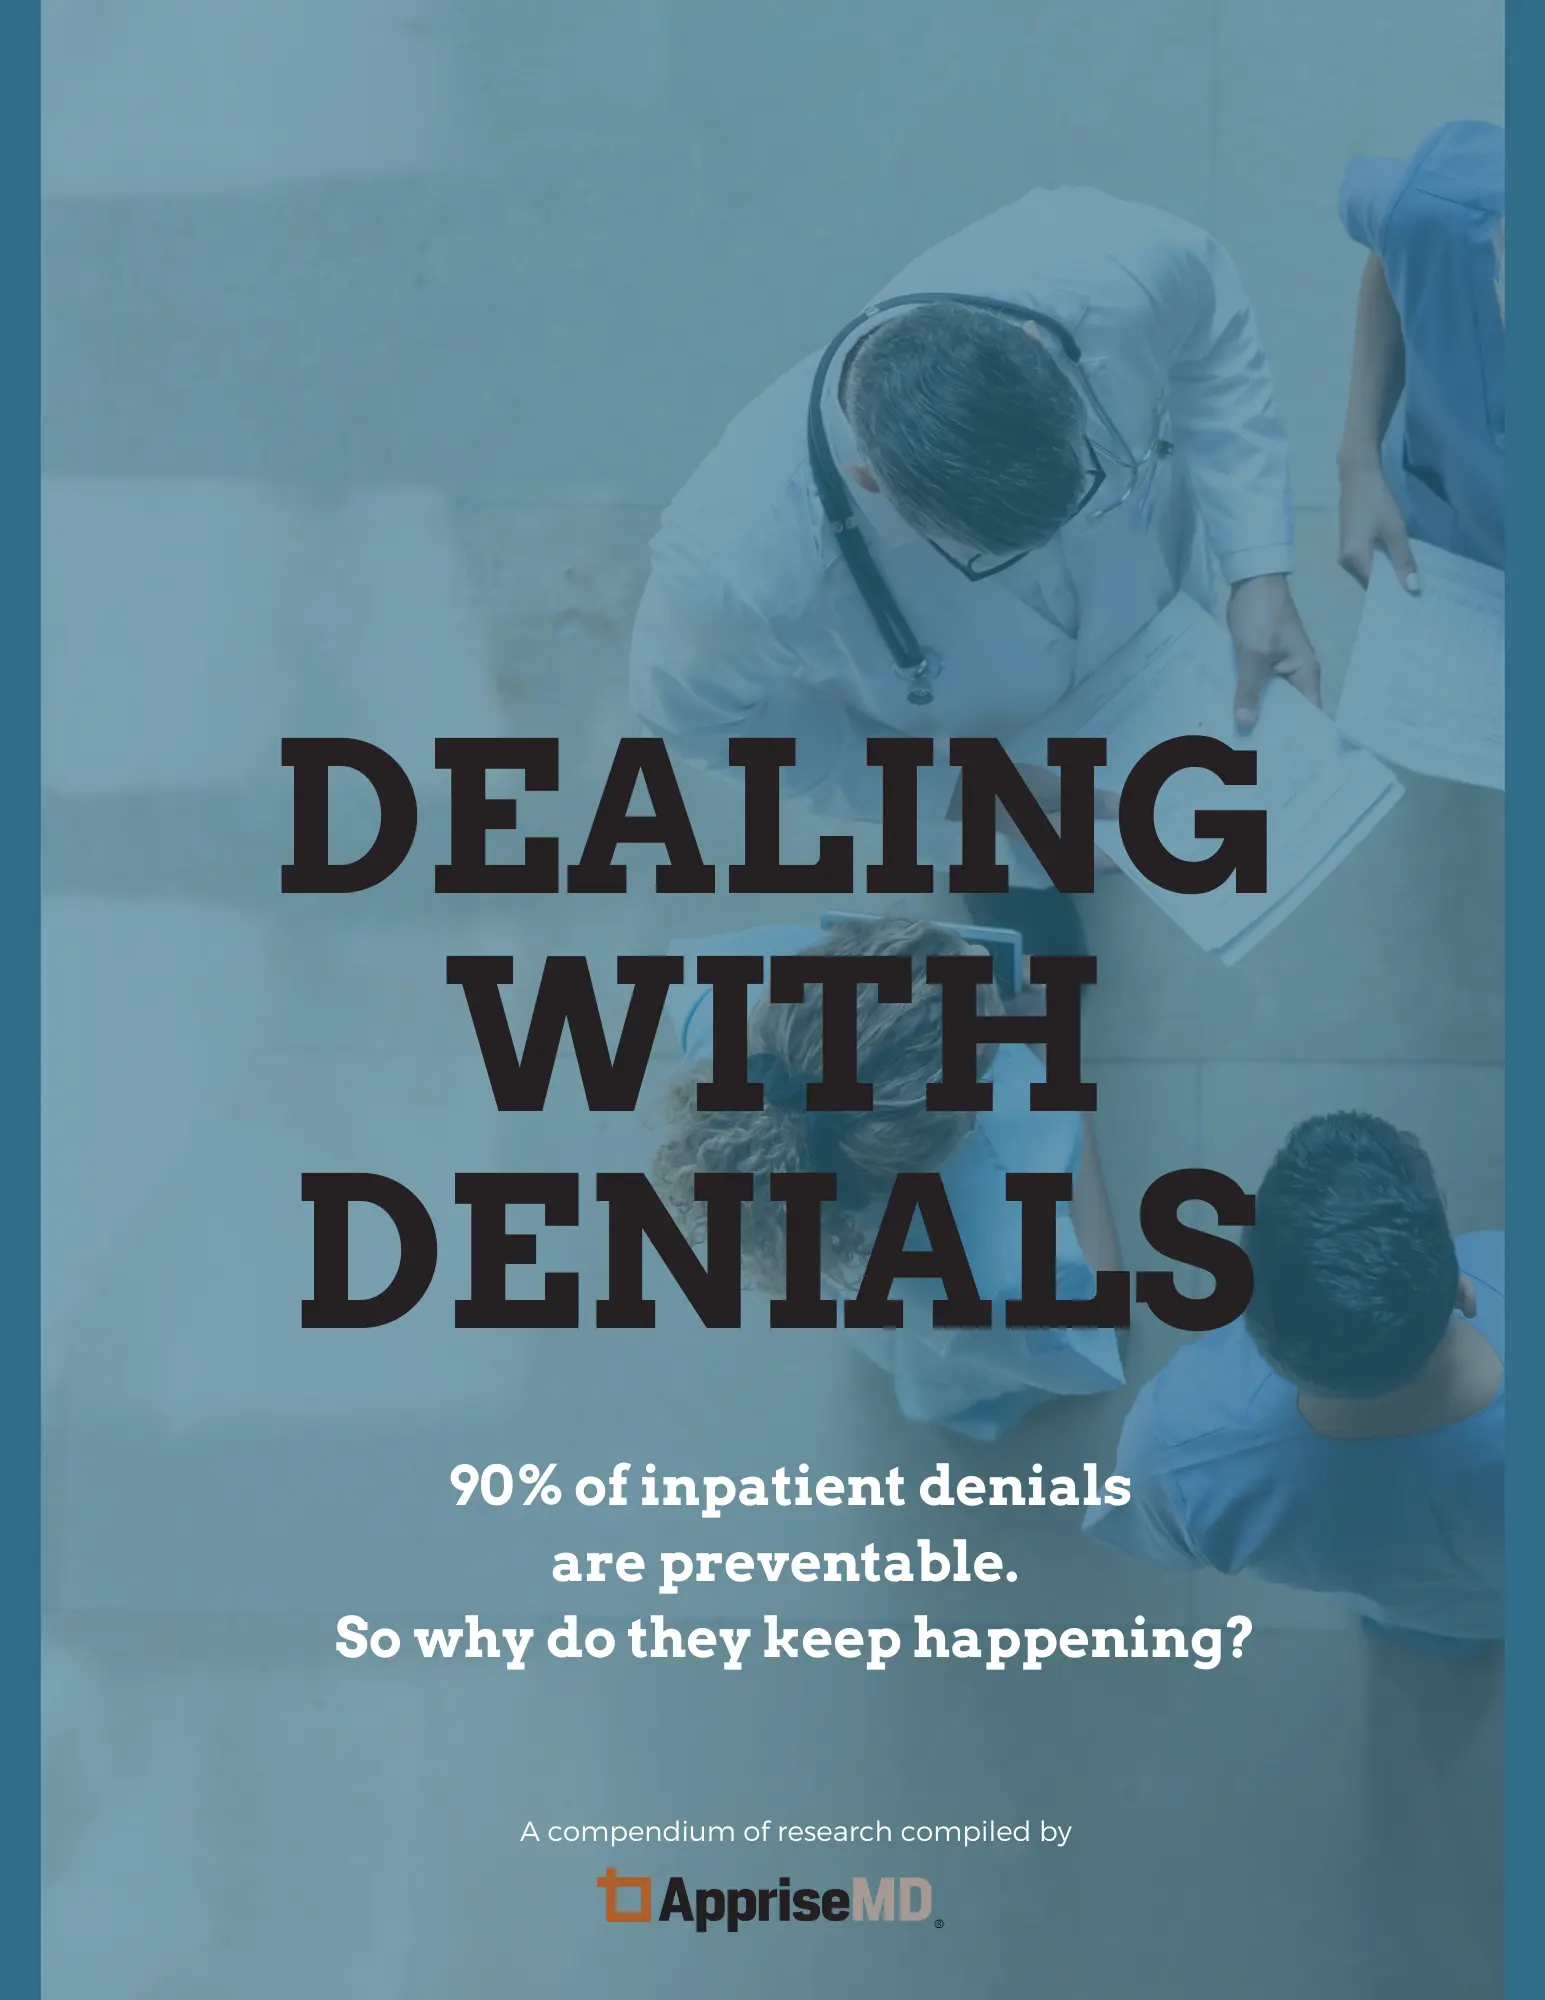 Dealing with denials, a compendium of research by AppriseMD